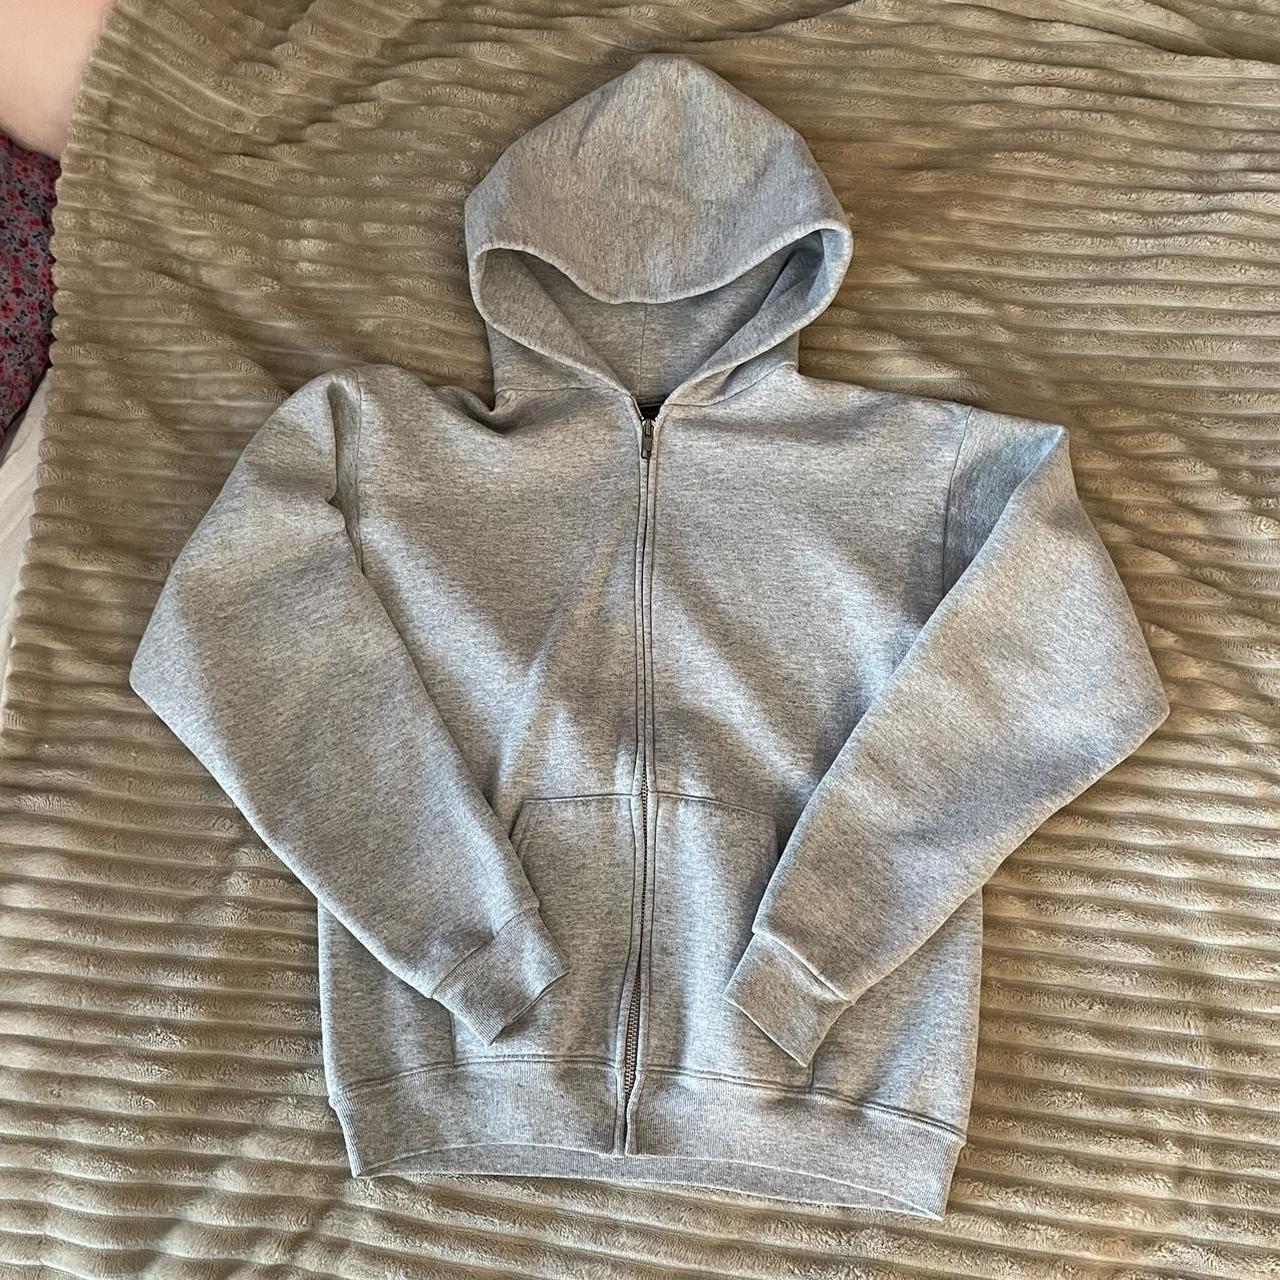 Apparently a few season old Brandy Melville Hoodie is Vintage? I had to do  a double take when I read the post : r/Depop